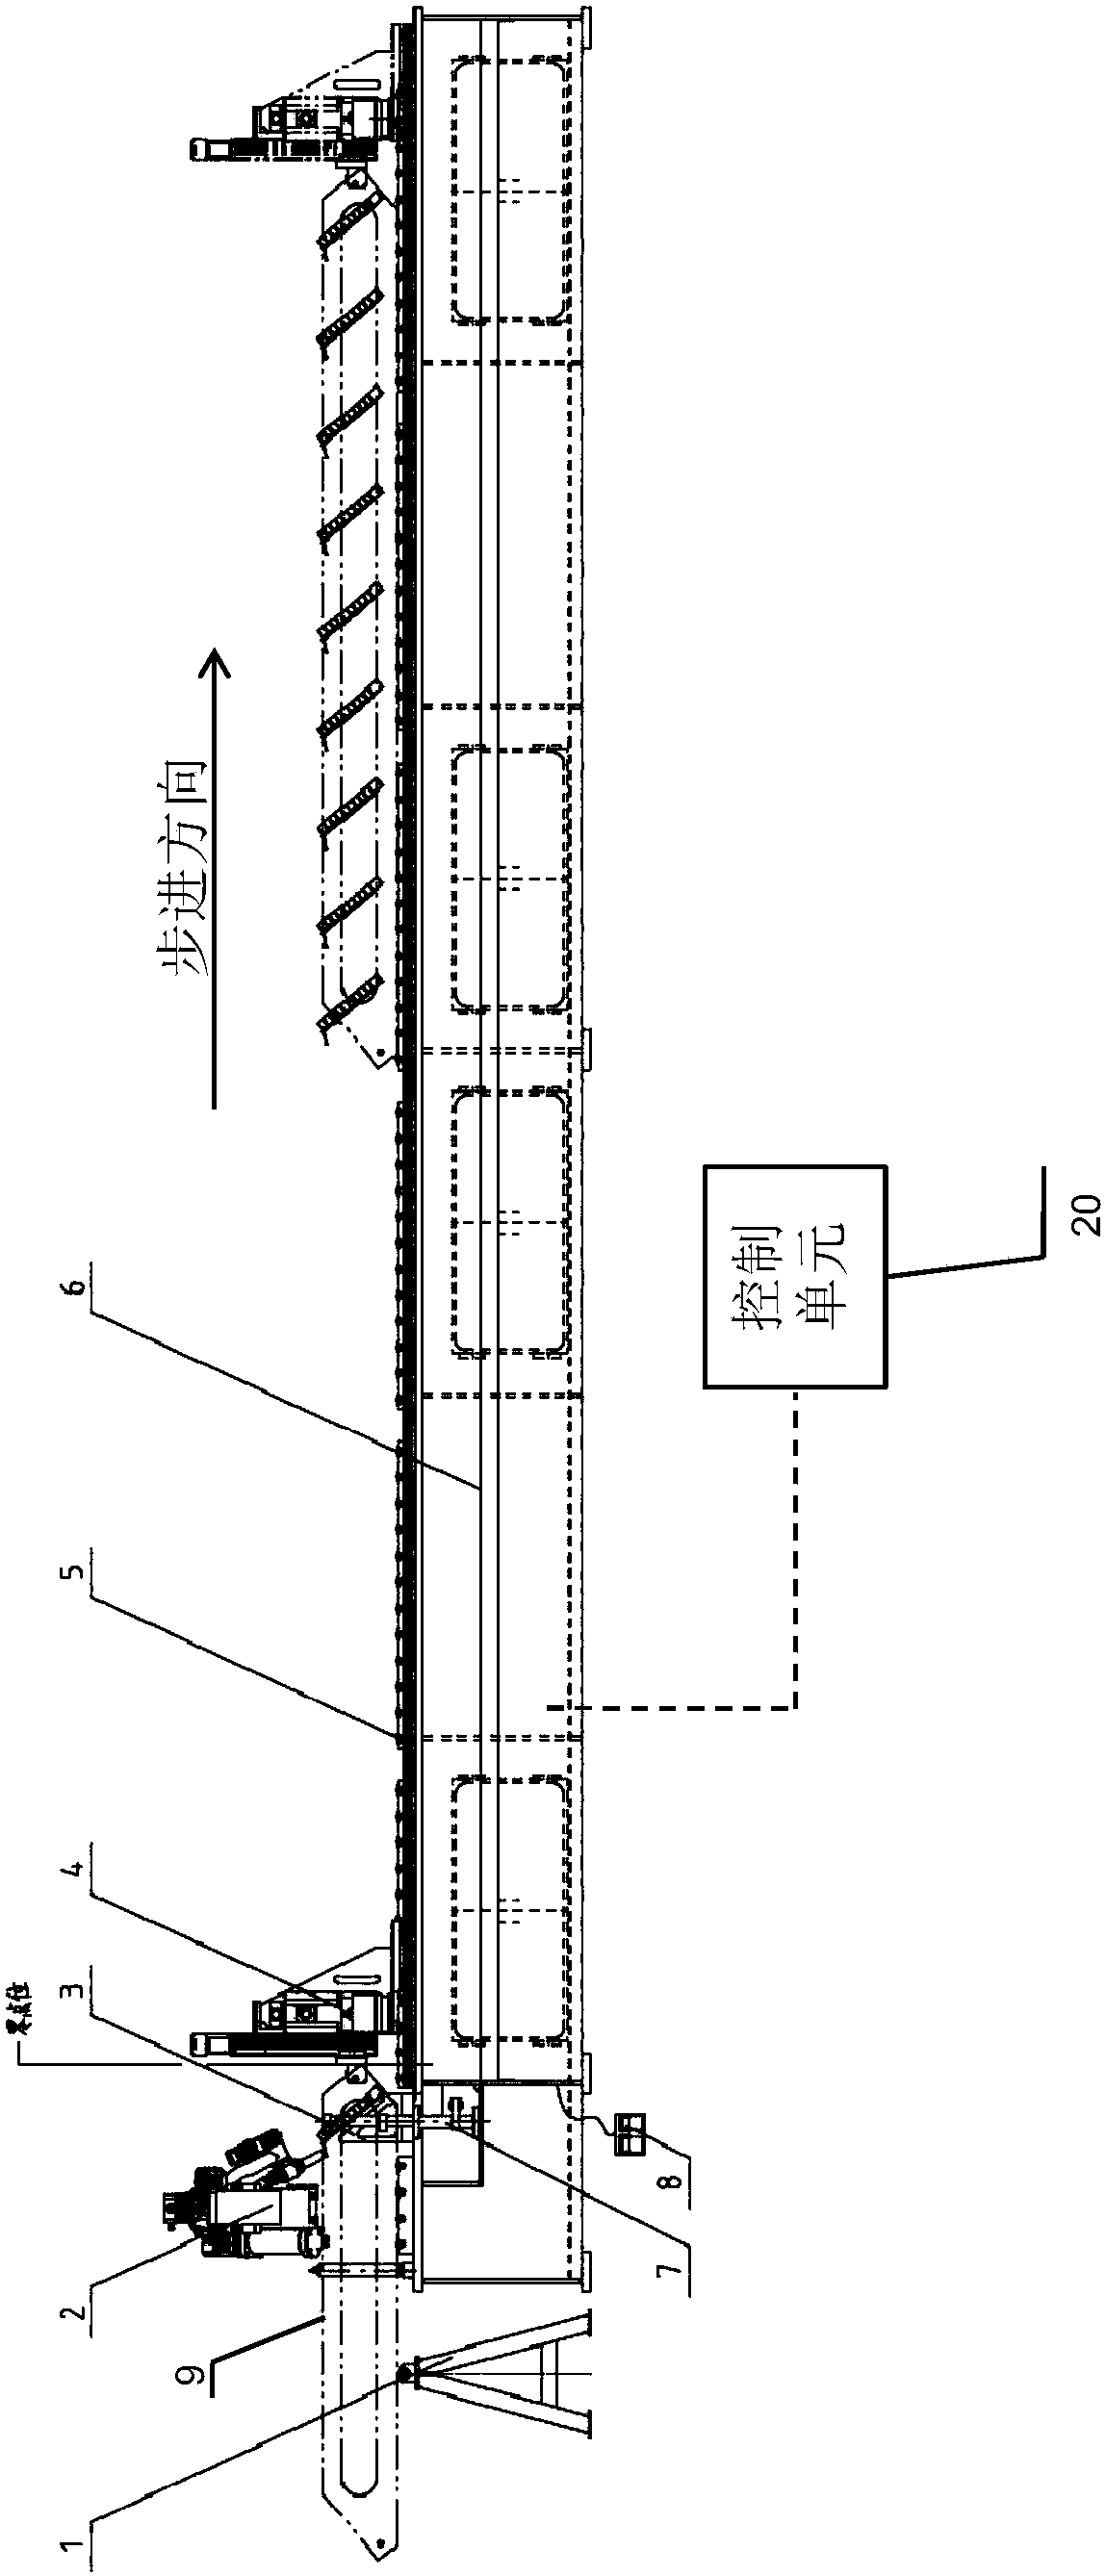 Semi-automatic inclined ladder pairing assembling system